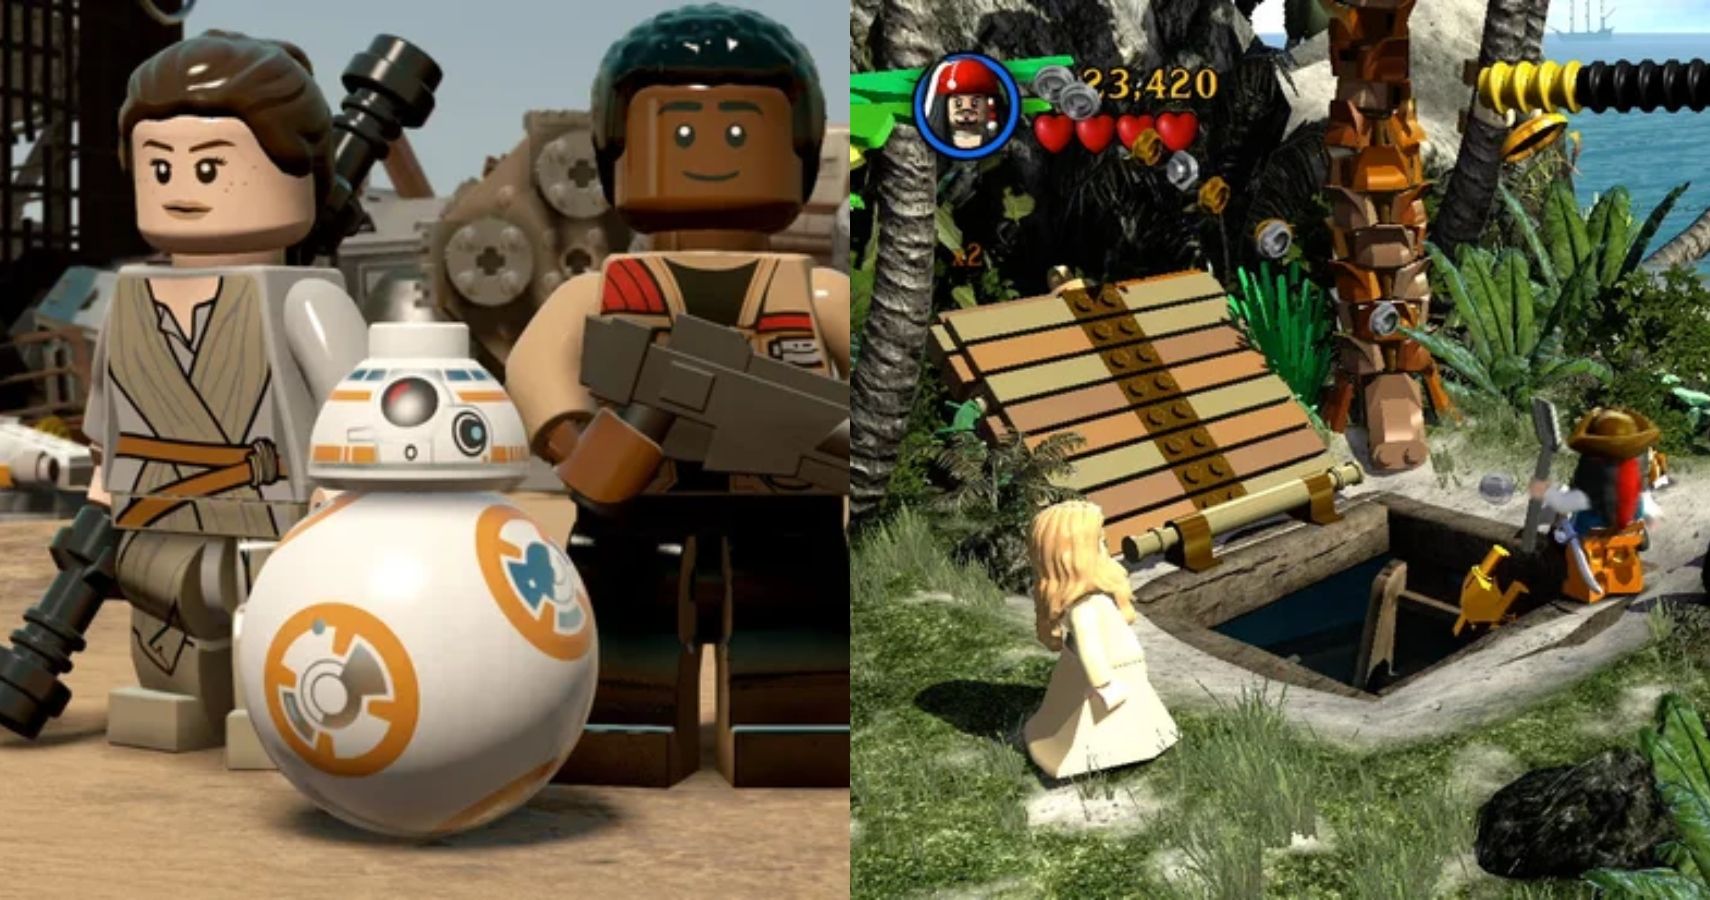 lego video games 2019